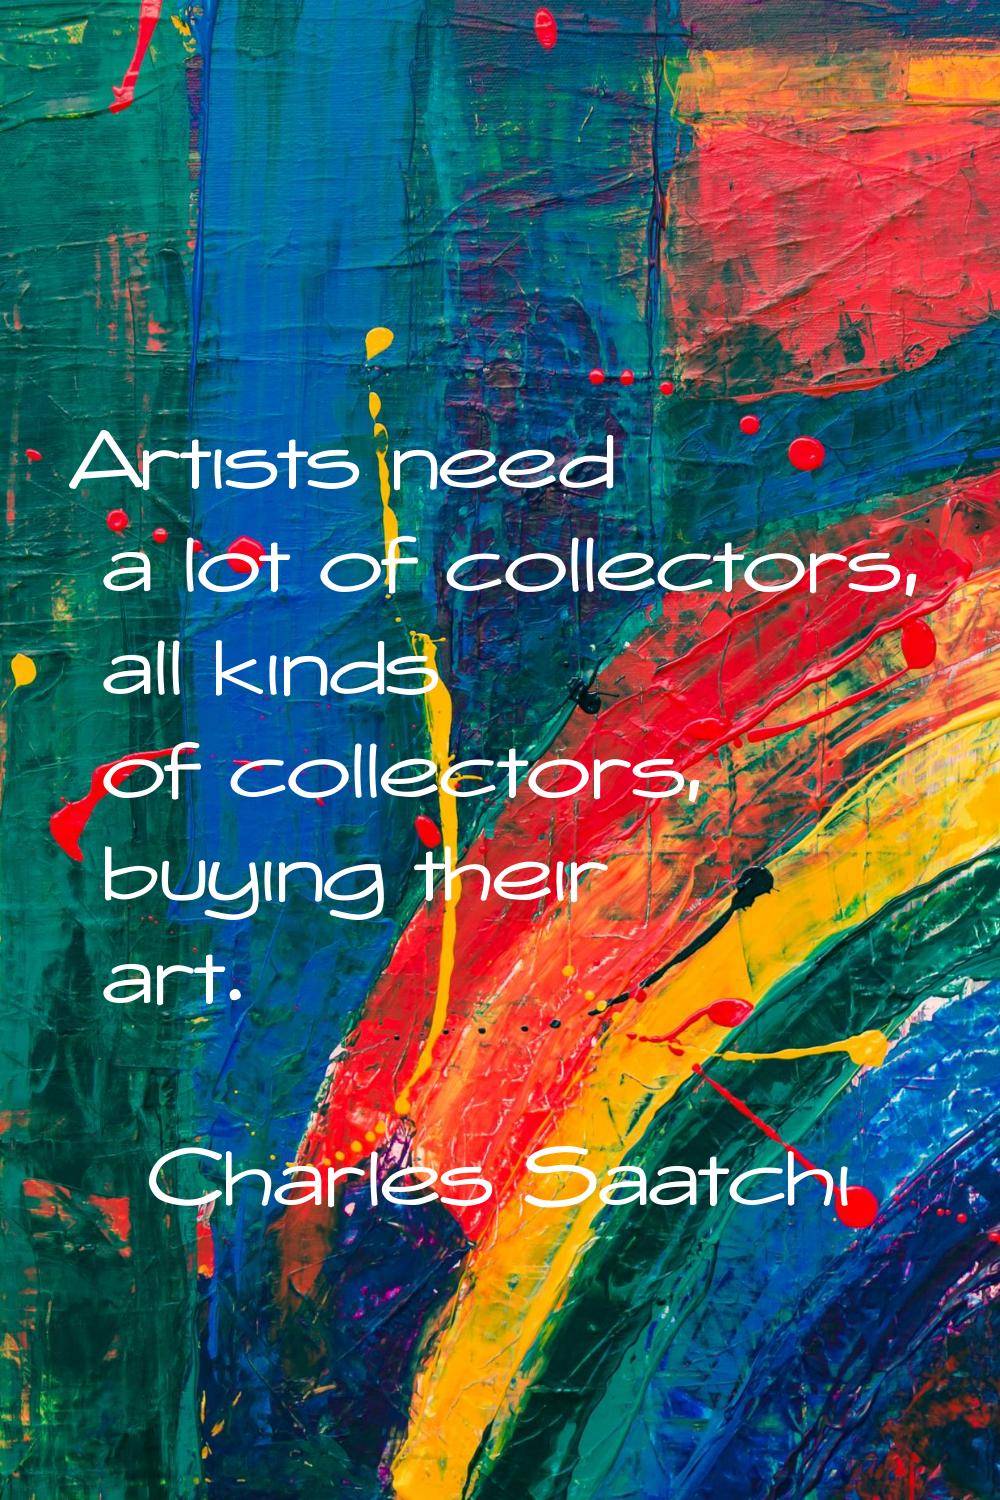 Artists need a lot of collectors, all kinds of collectors, buying their art.